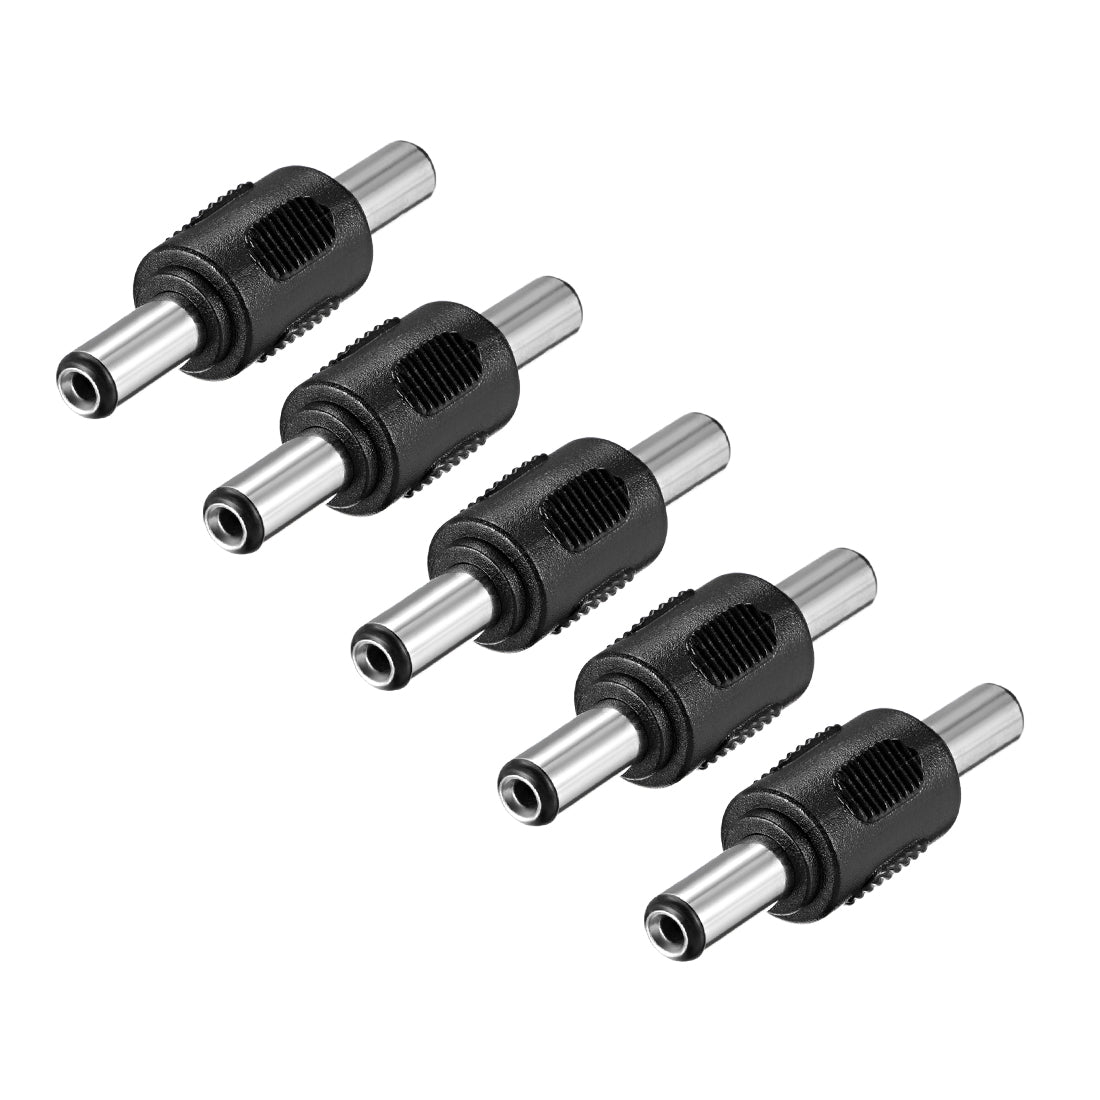 uxcell Uxcell DC Male to Male Connector 5.5mm x 2.5mm Power Cable Jack Adapter Black 5Pcs